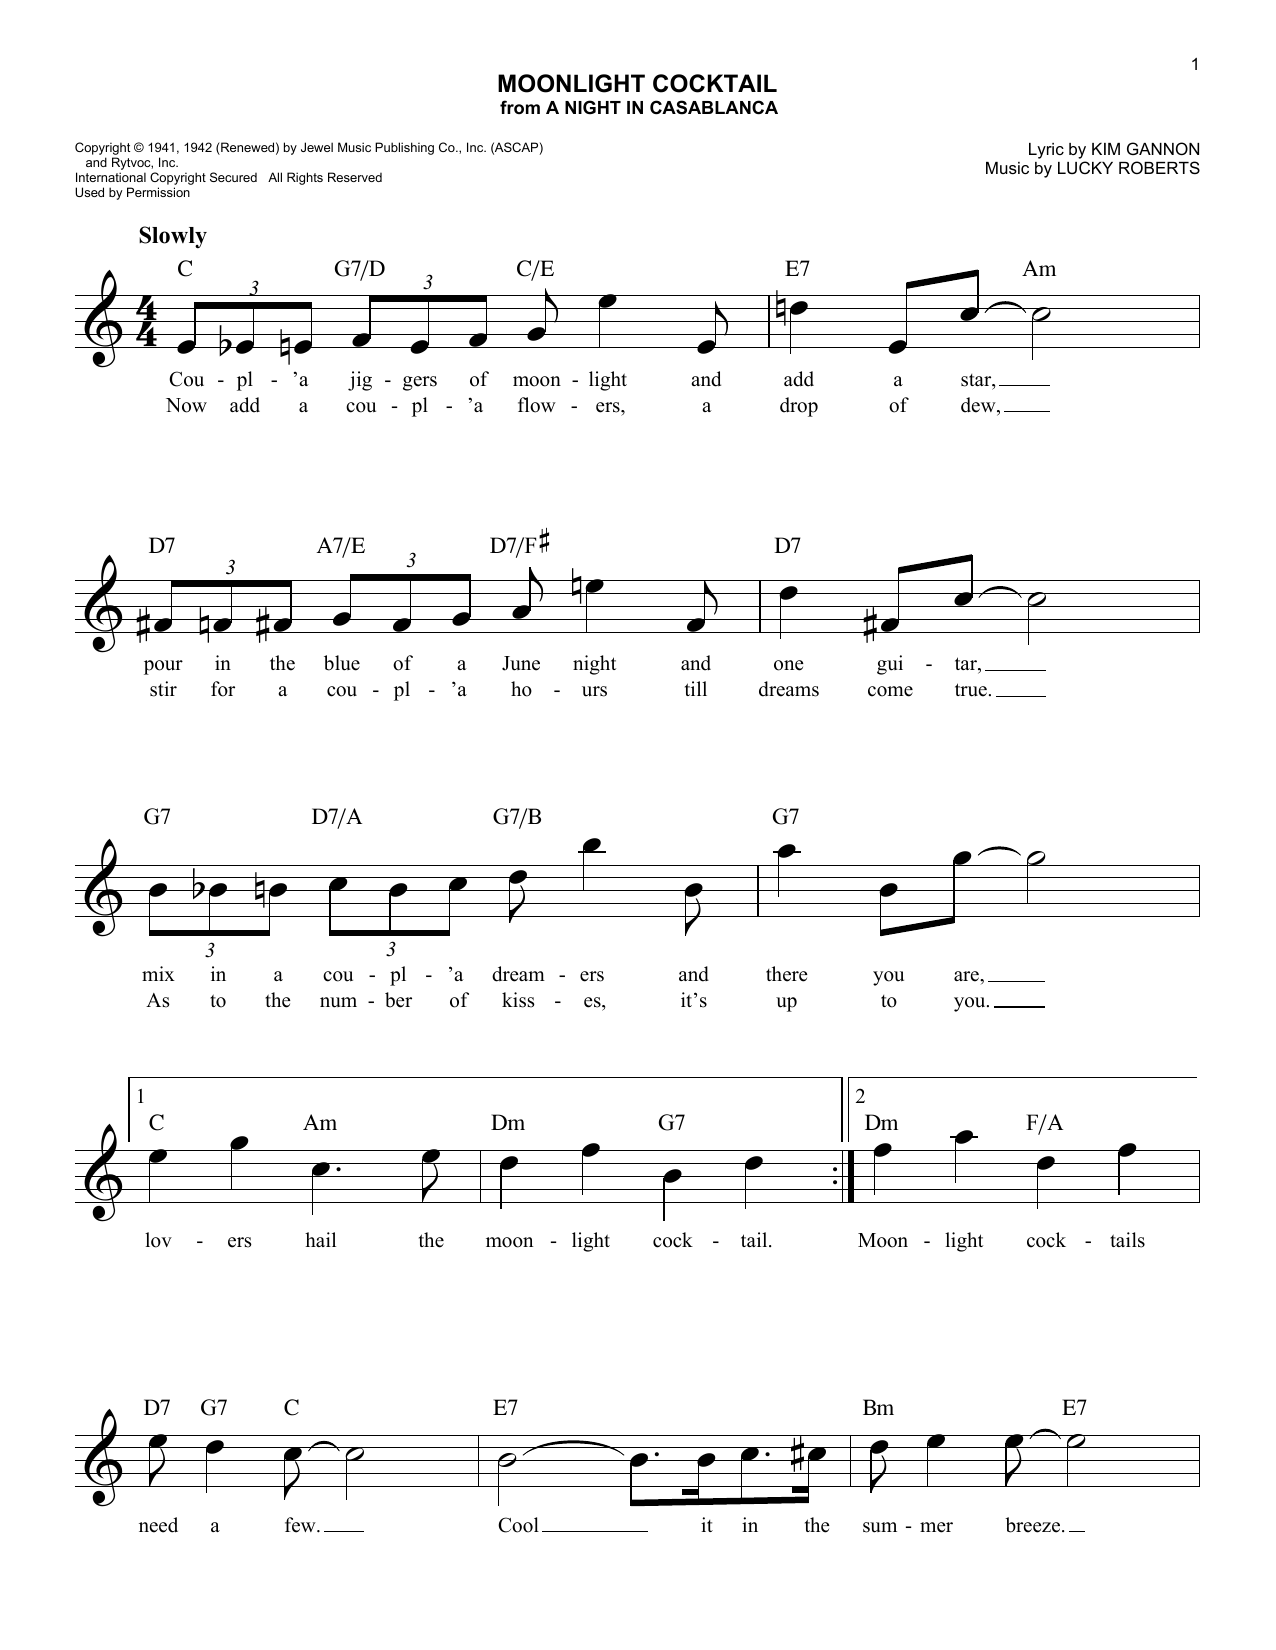 Lucky Roberts Moonlight Cocktail sheet music notes and chords. Download Printable PDF.